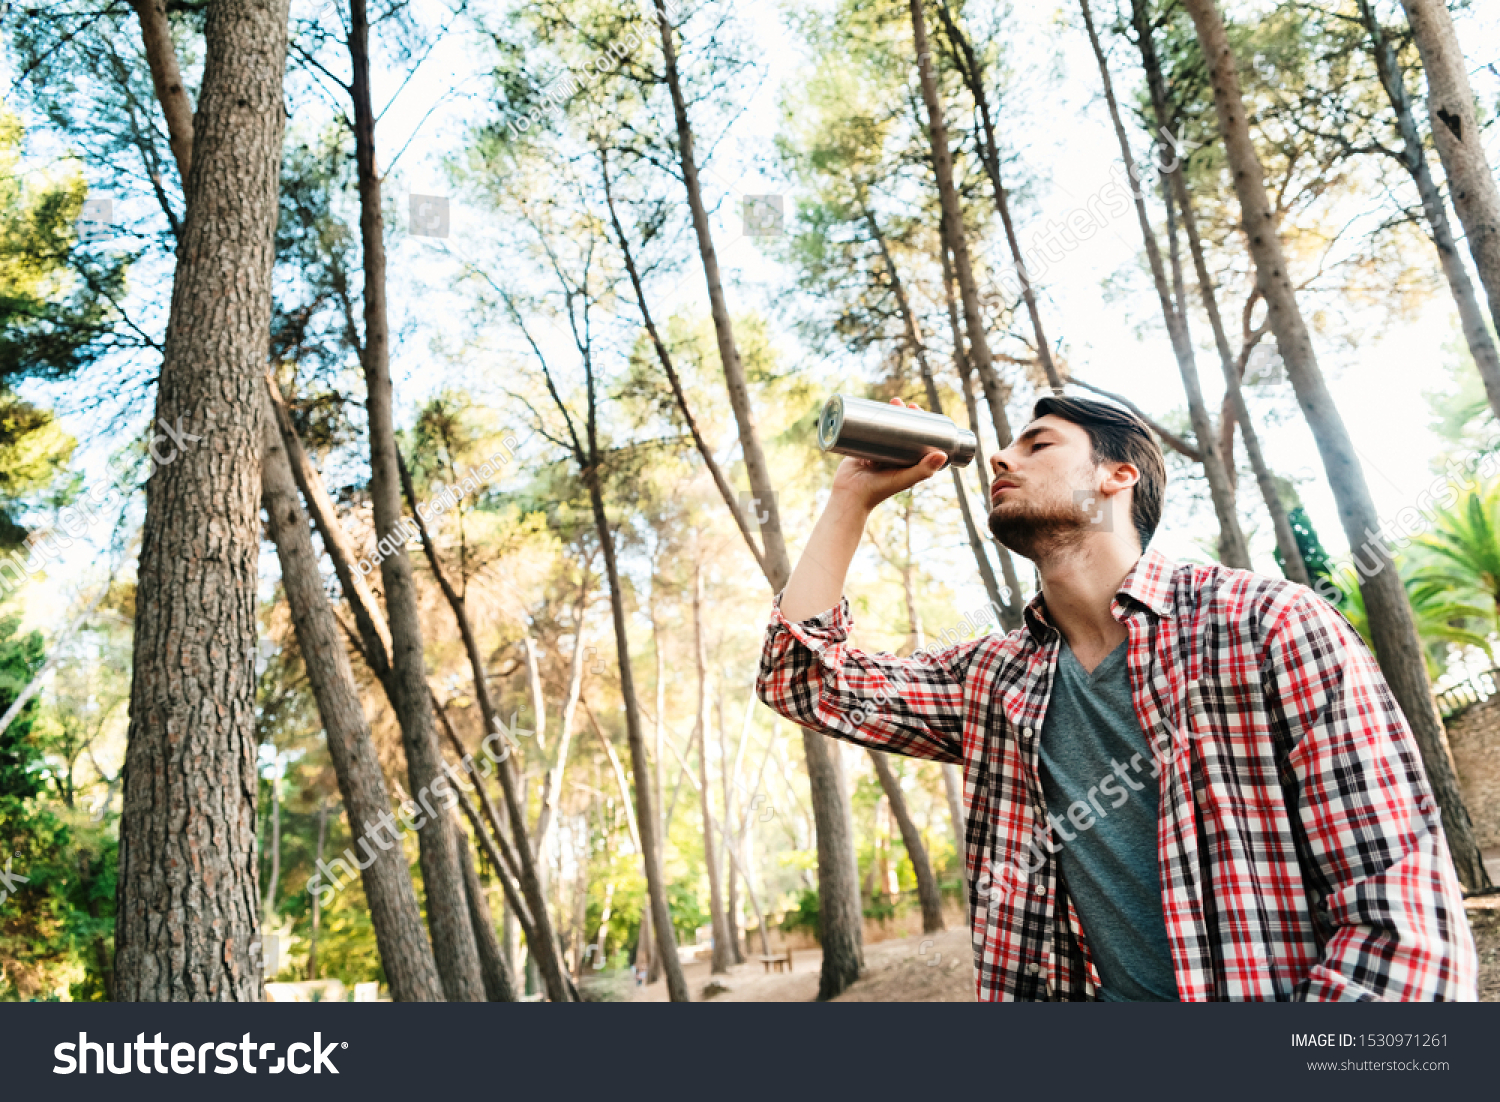 stock pollution image water can